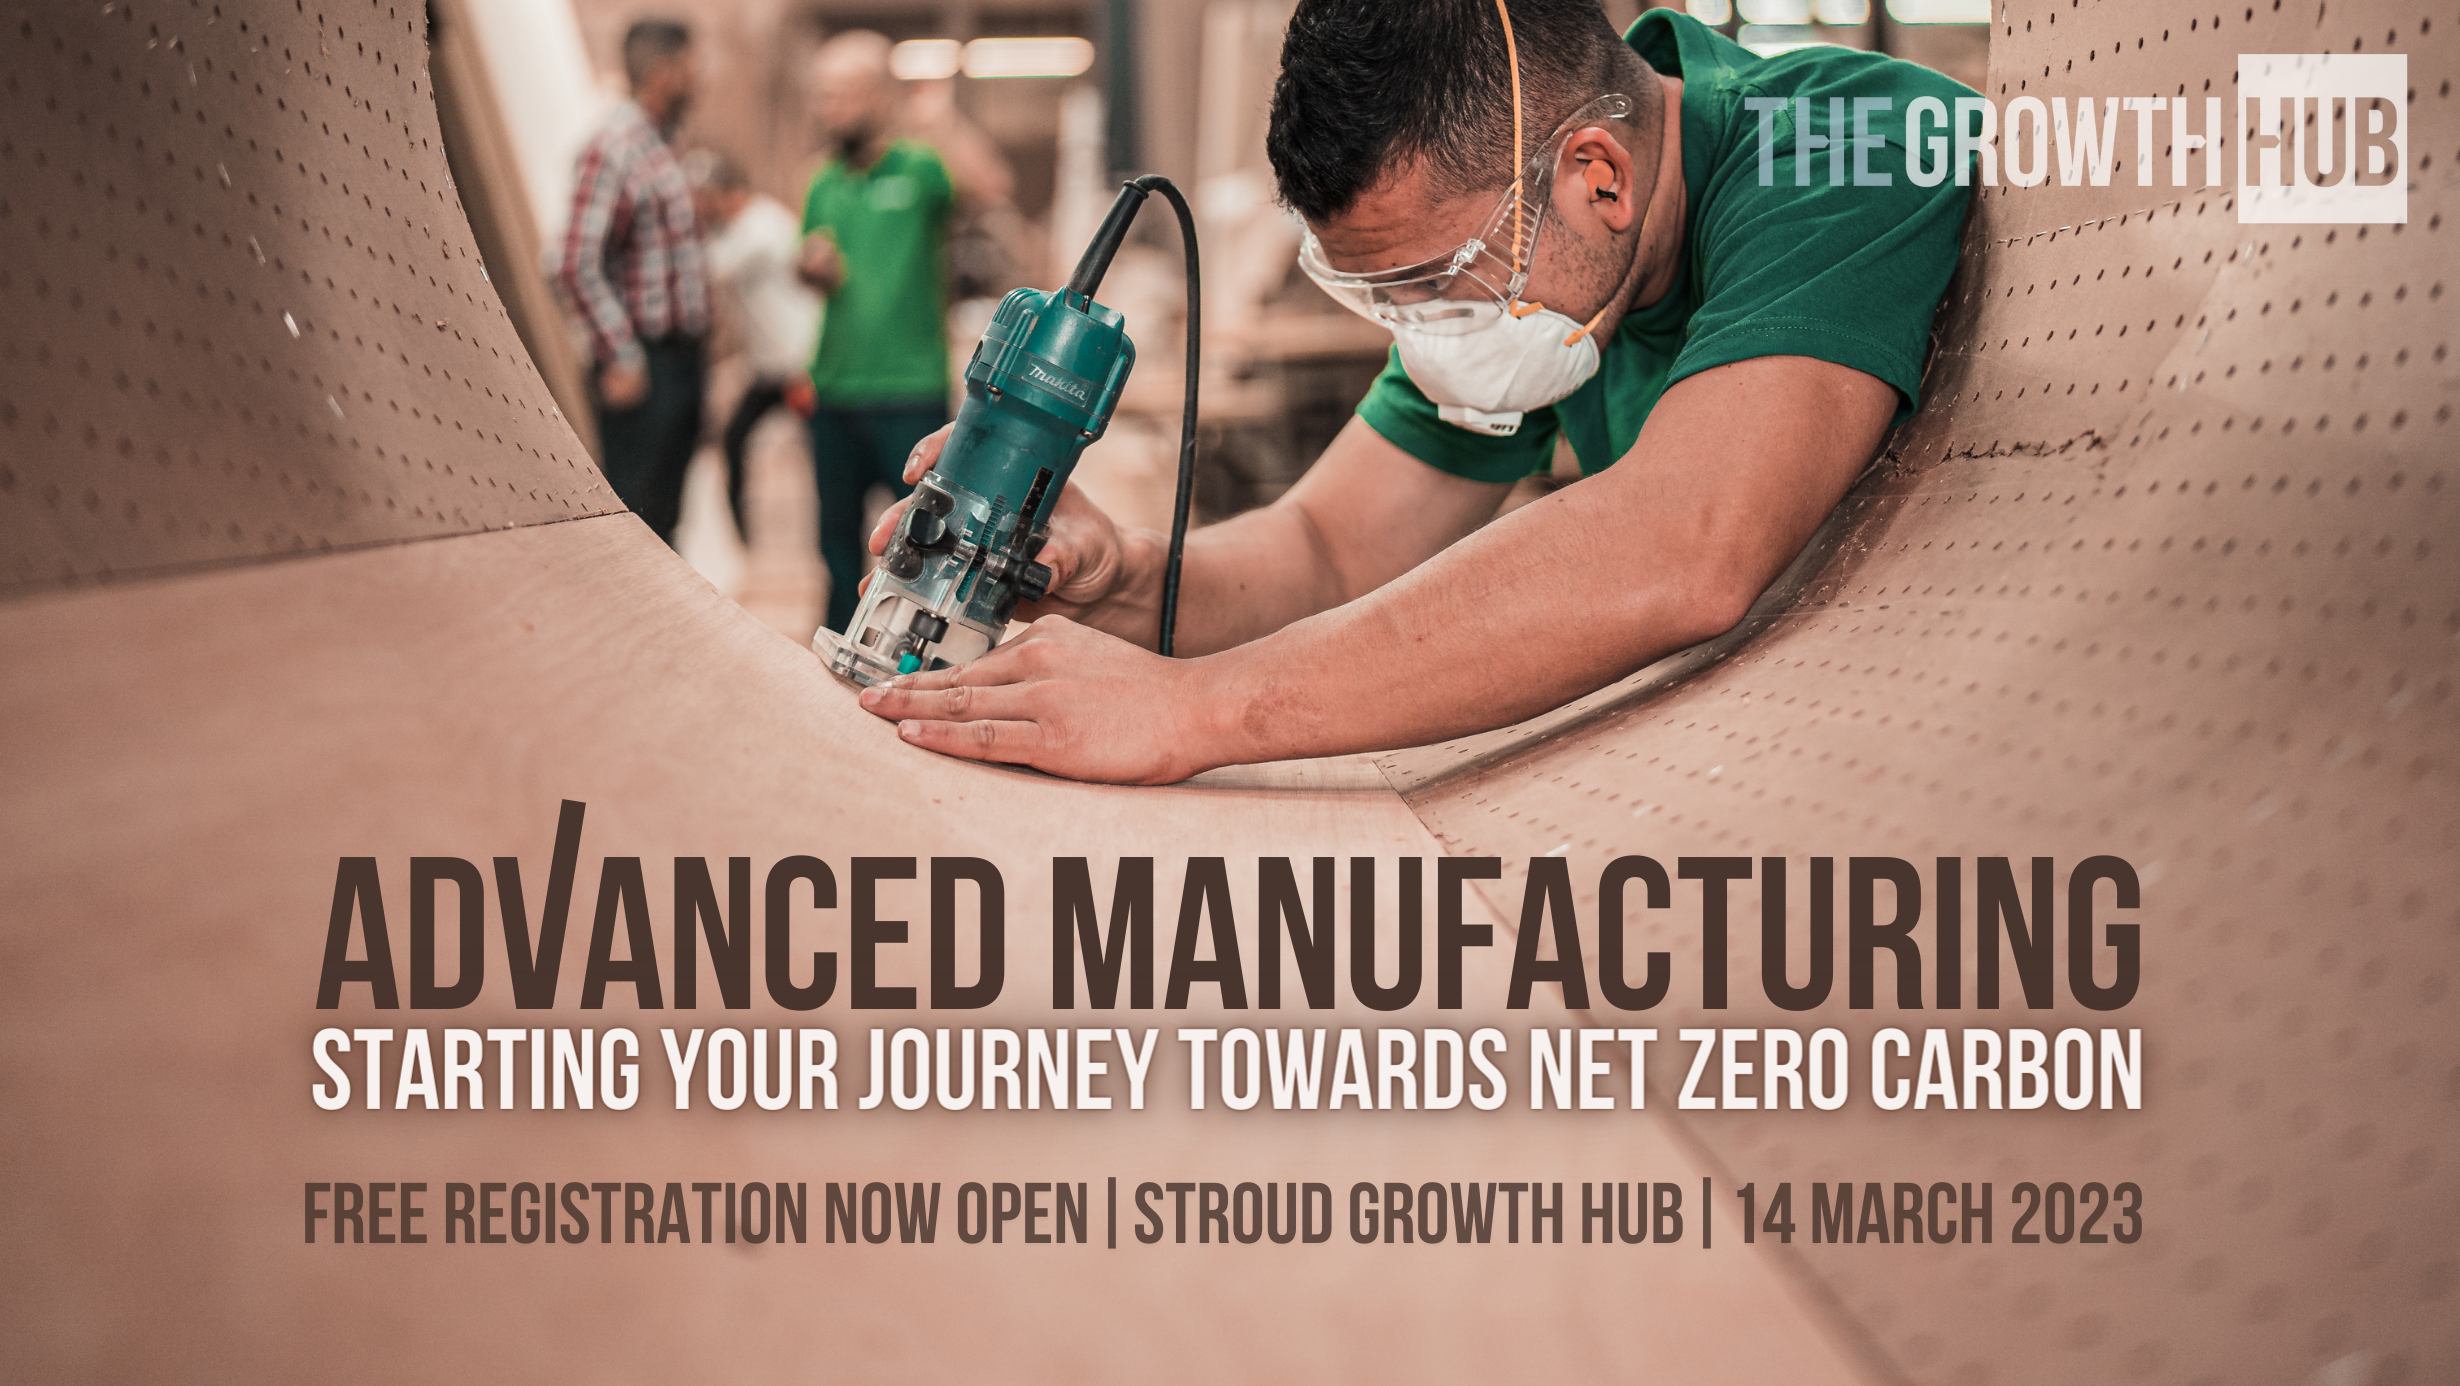 Stroud Growth Hub launch Net Zero event for Advanced Manufacturing sector